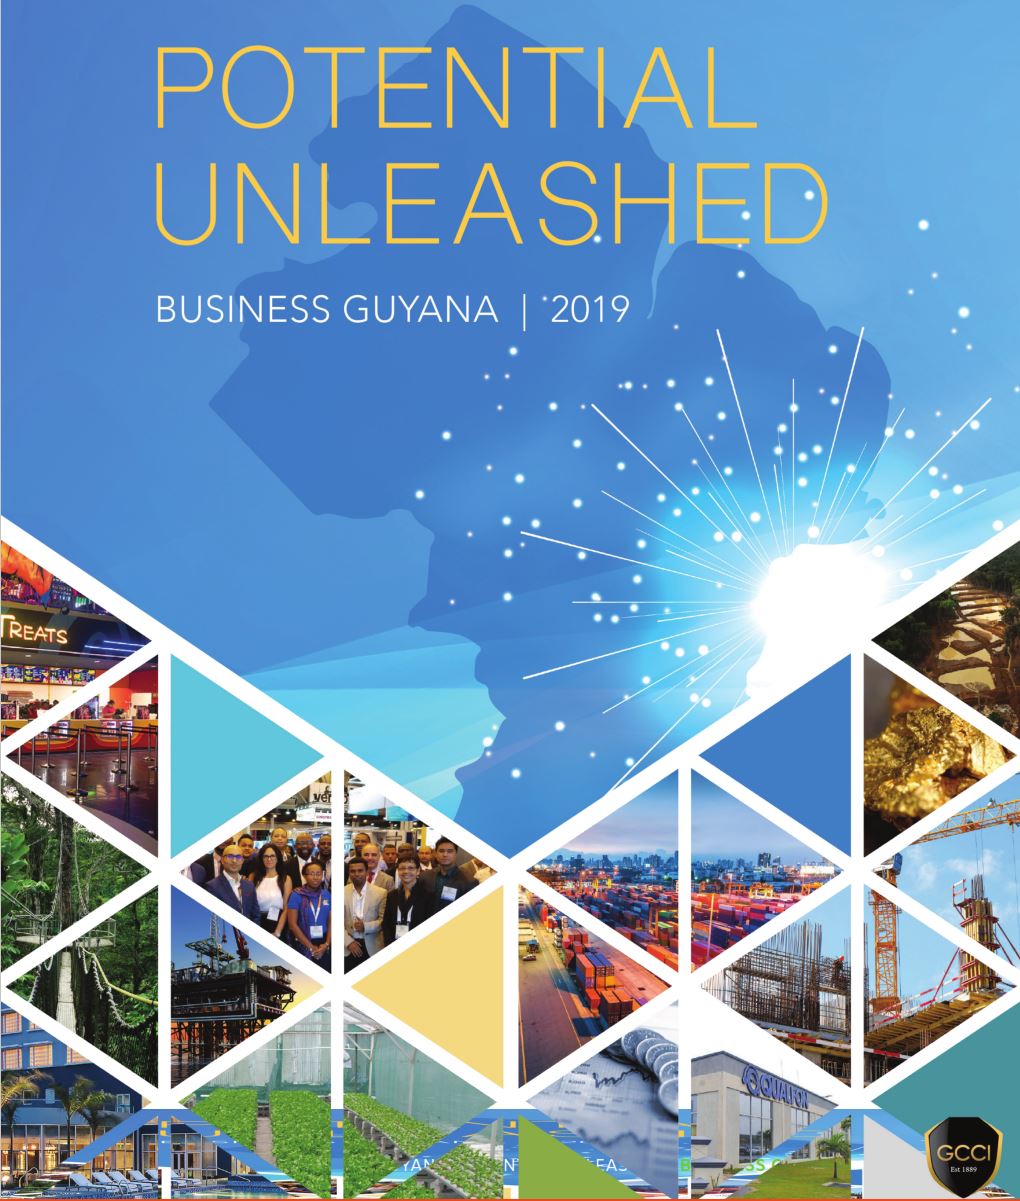 Business Guyana 2019 – Potential Unleashed